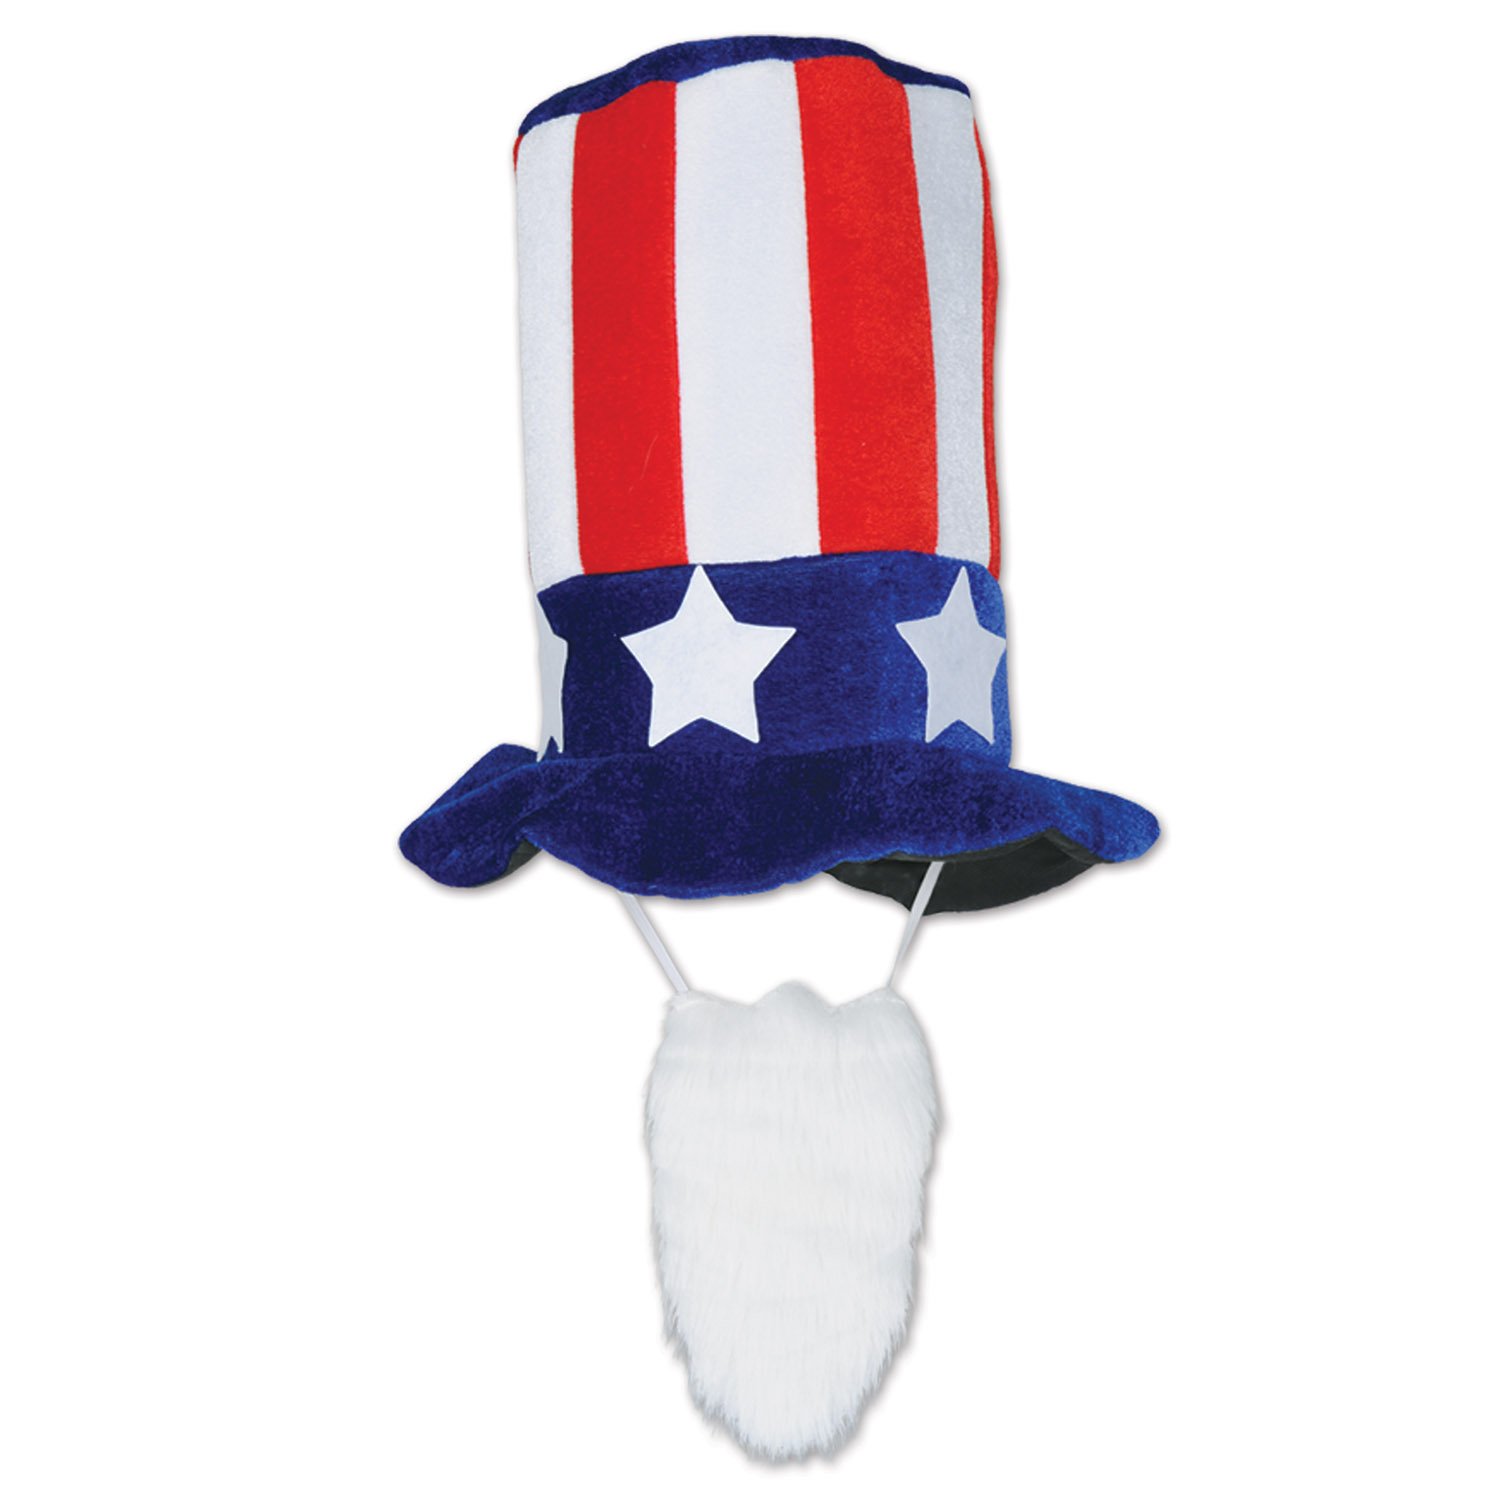 Beistle None Plush Patriotic Hat w/Beard, Red/White/Blue, One Size